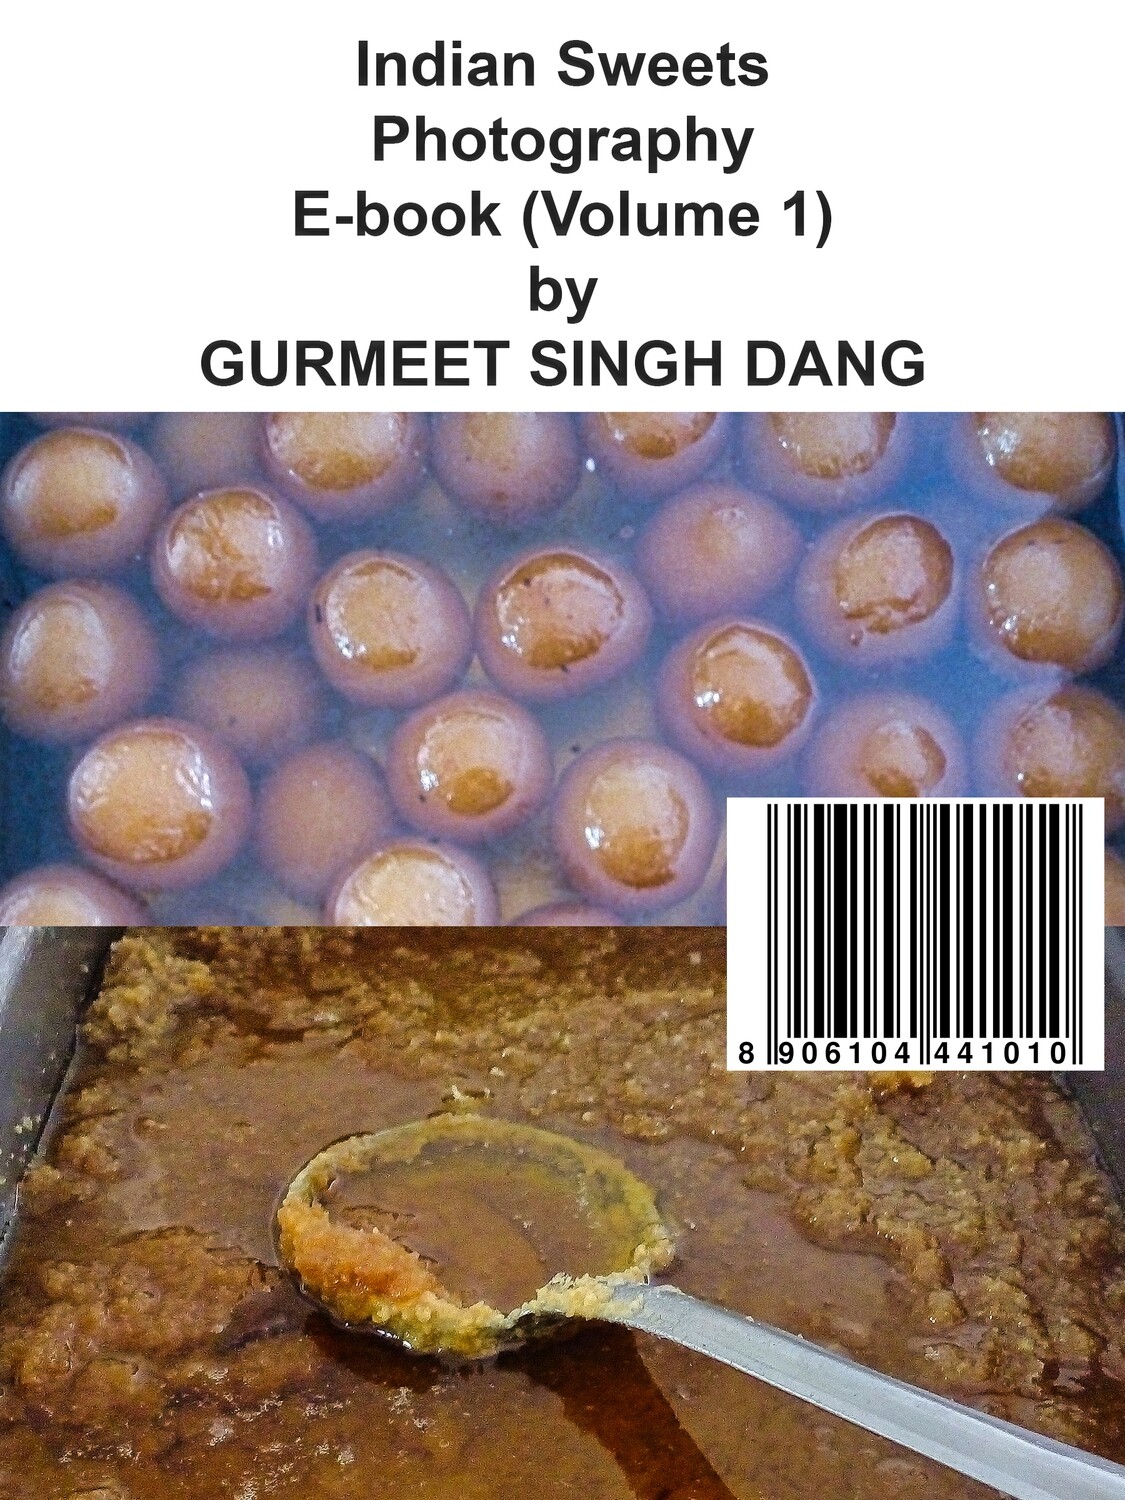 Indian Sweets Photography E-book (Volume 1) by GURMEET SINGH DANG